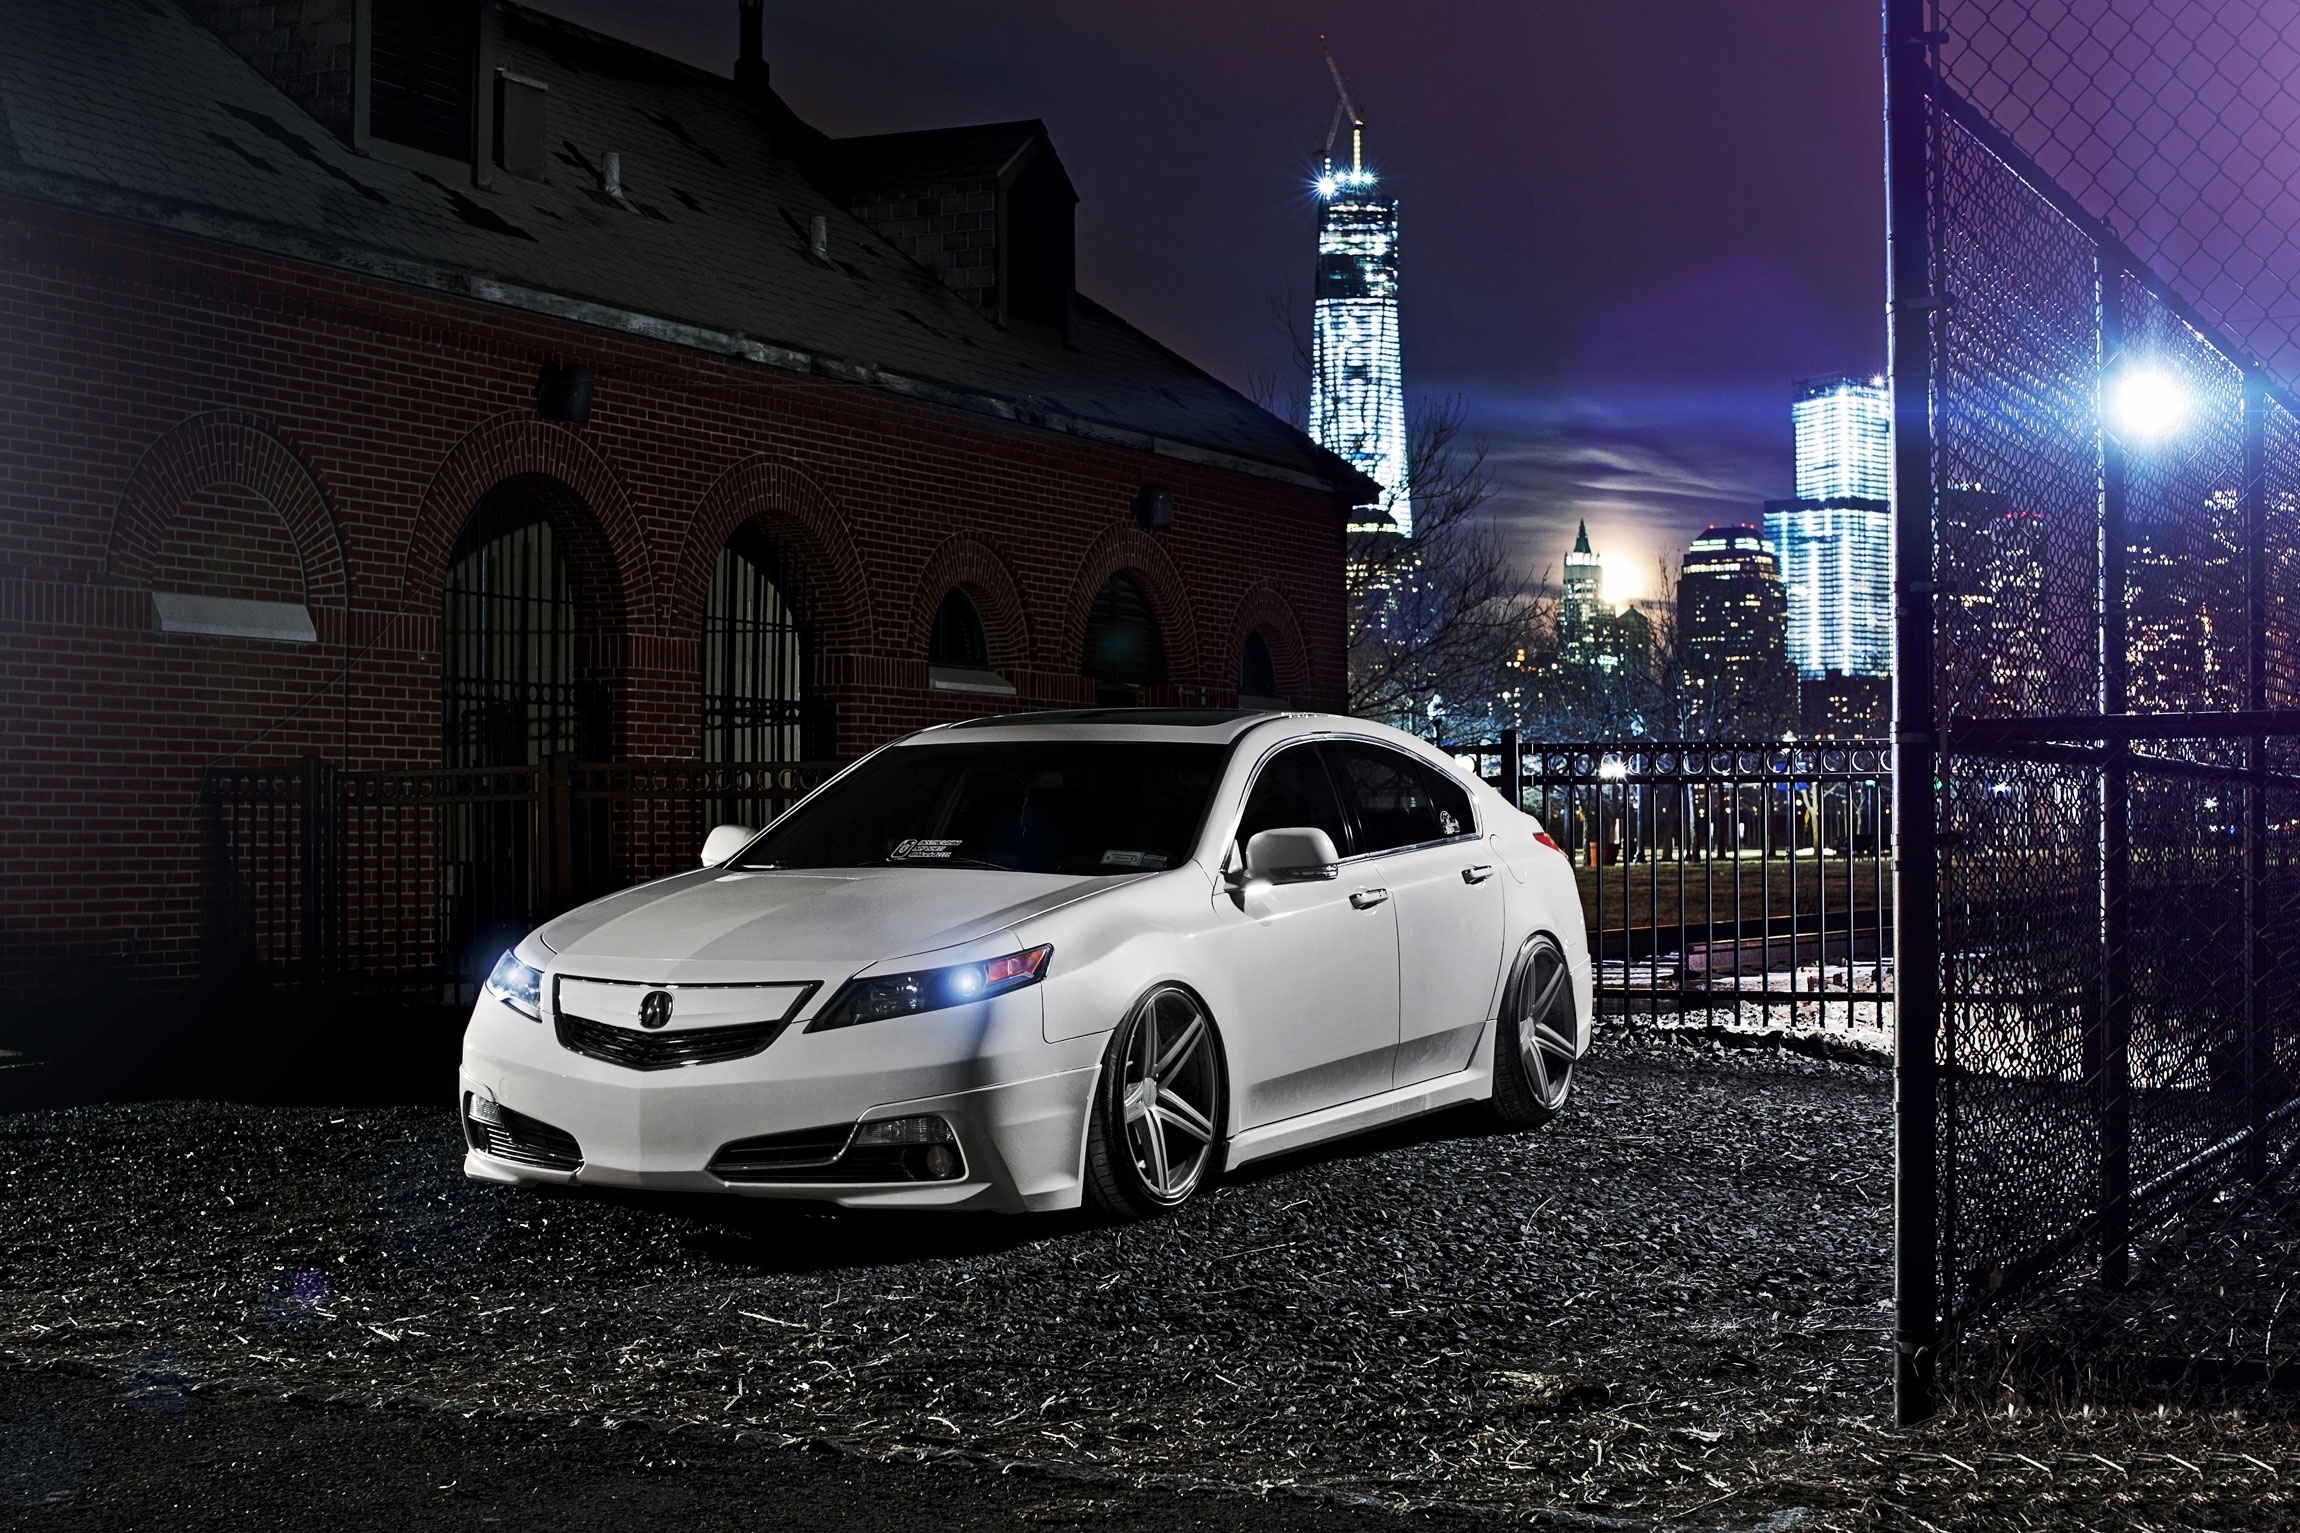 Wallpapers Acura style night on the desktop